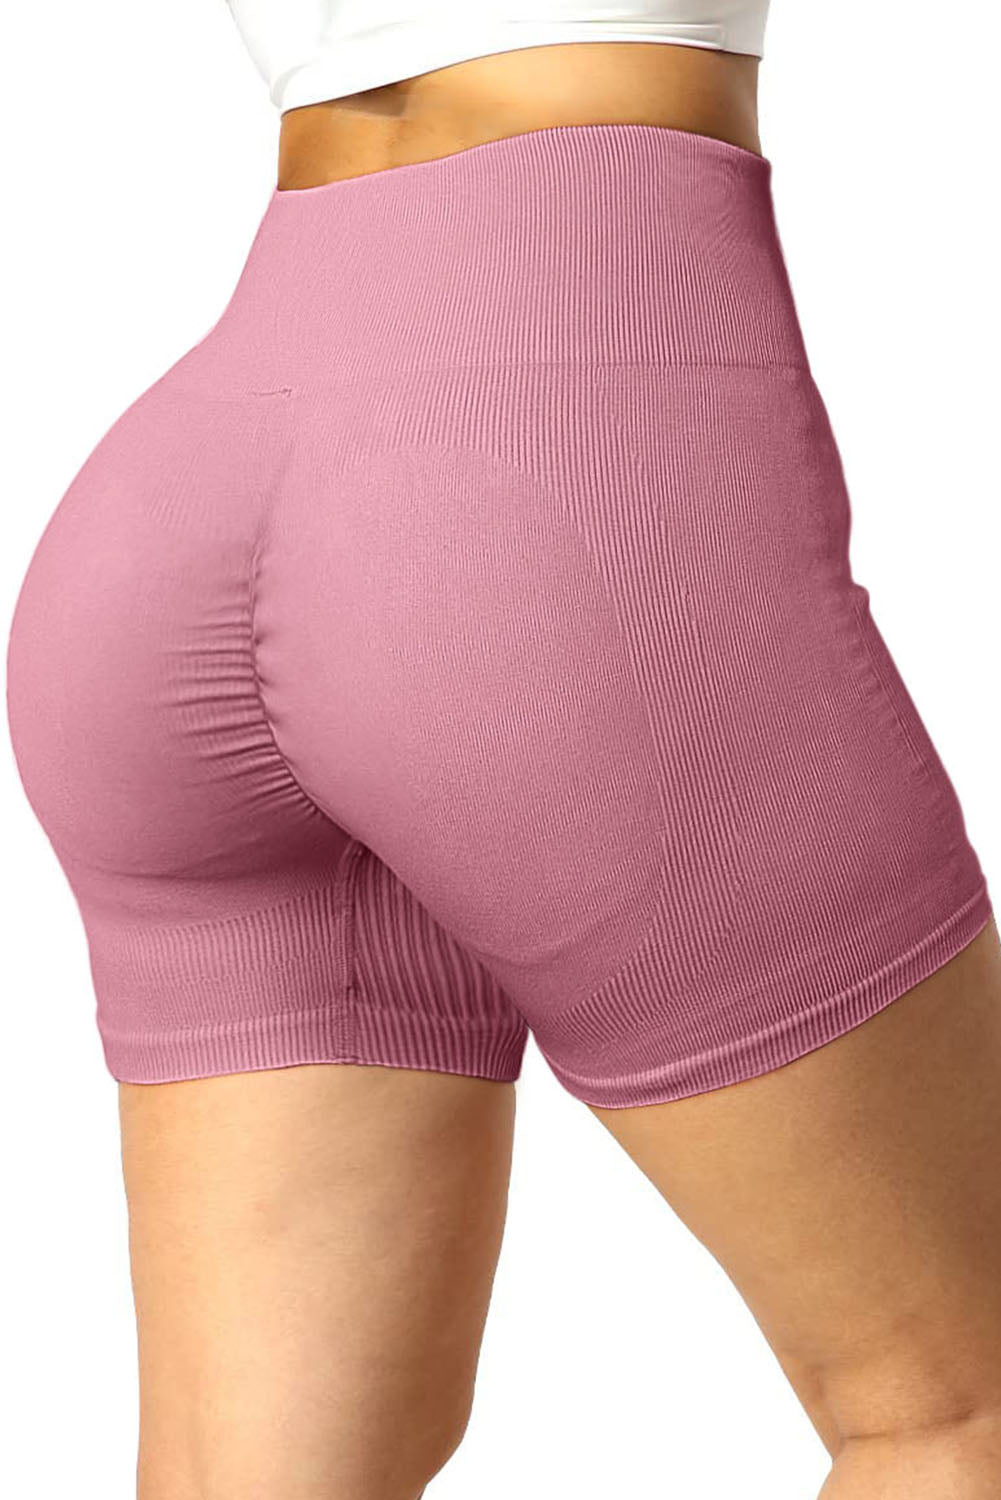 Ribbed Sports Shorts - Light Pink / S - Women’s Clothing & Accessories - Shorts - 16 - 2024